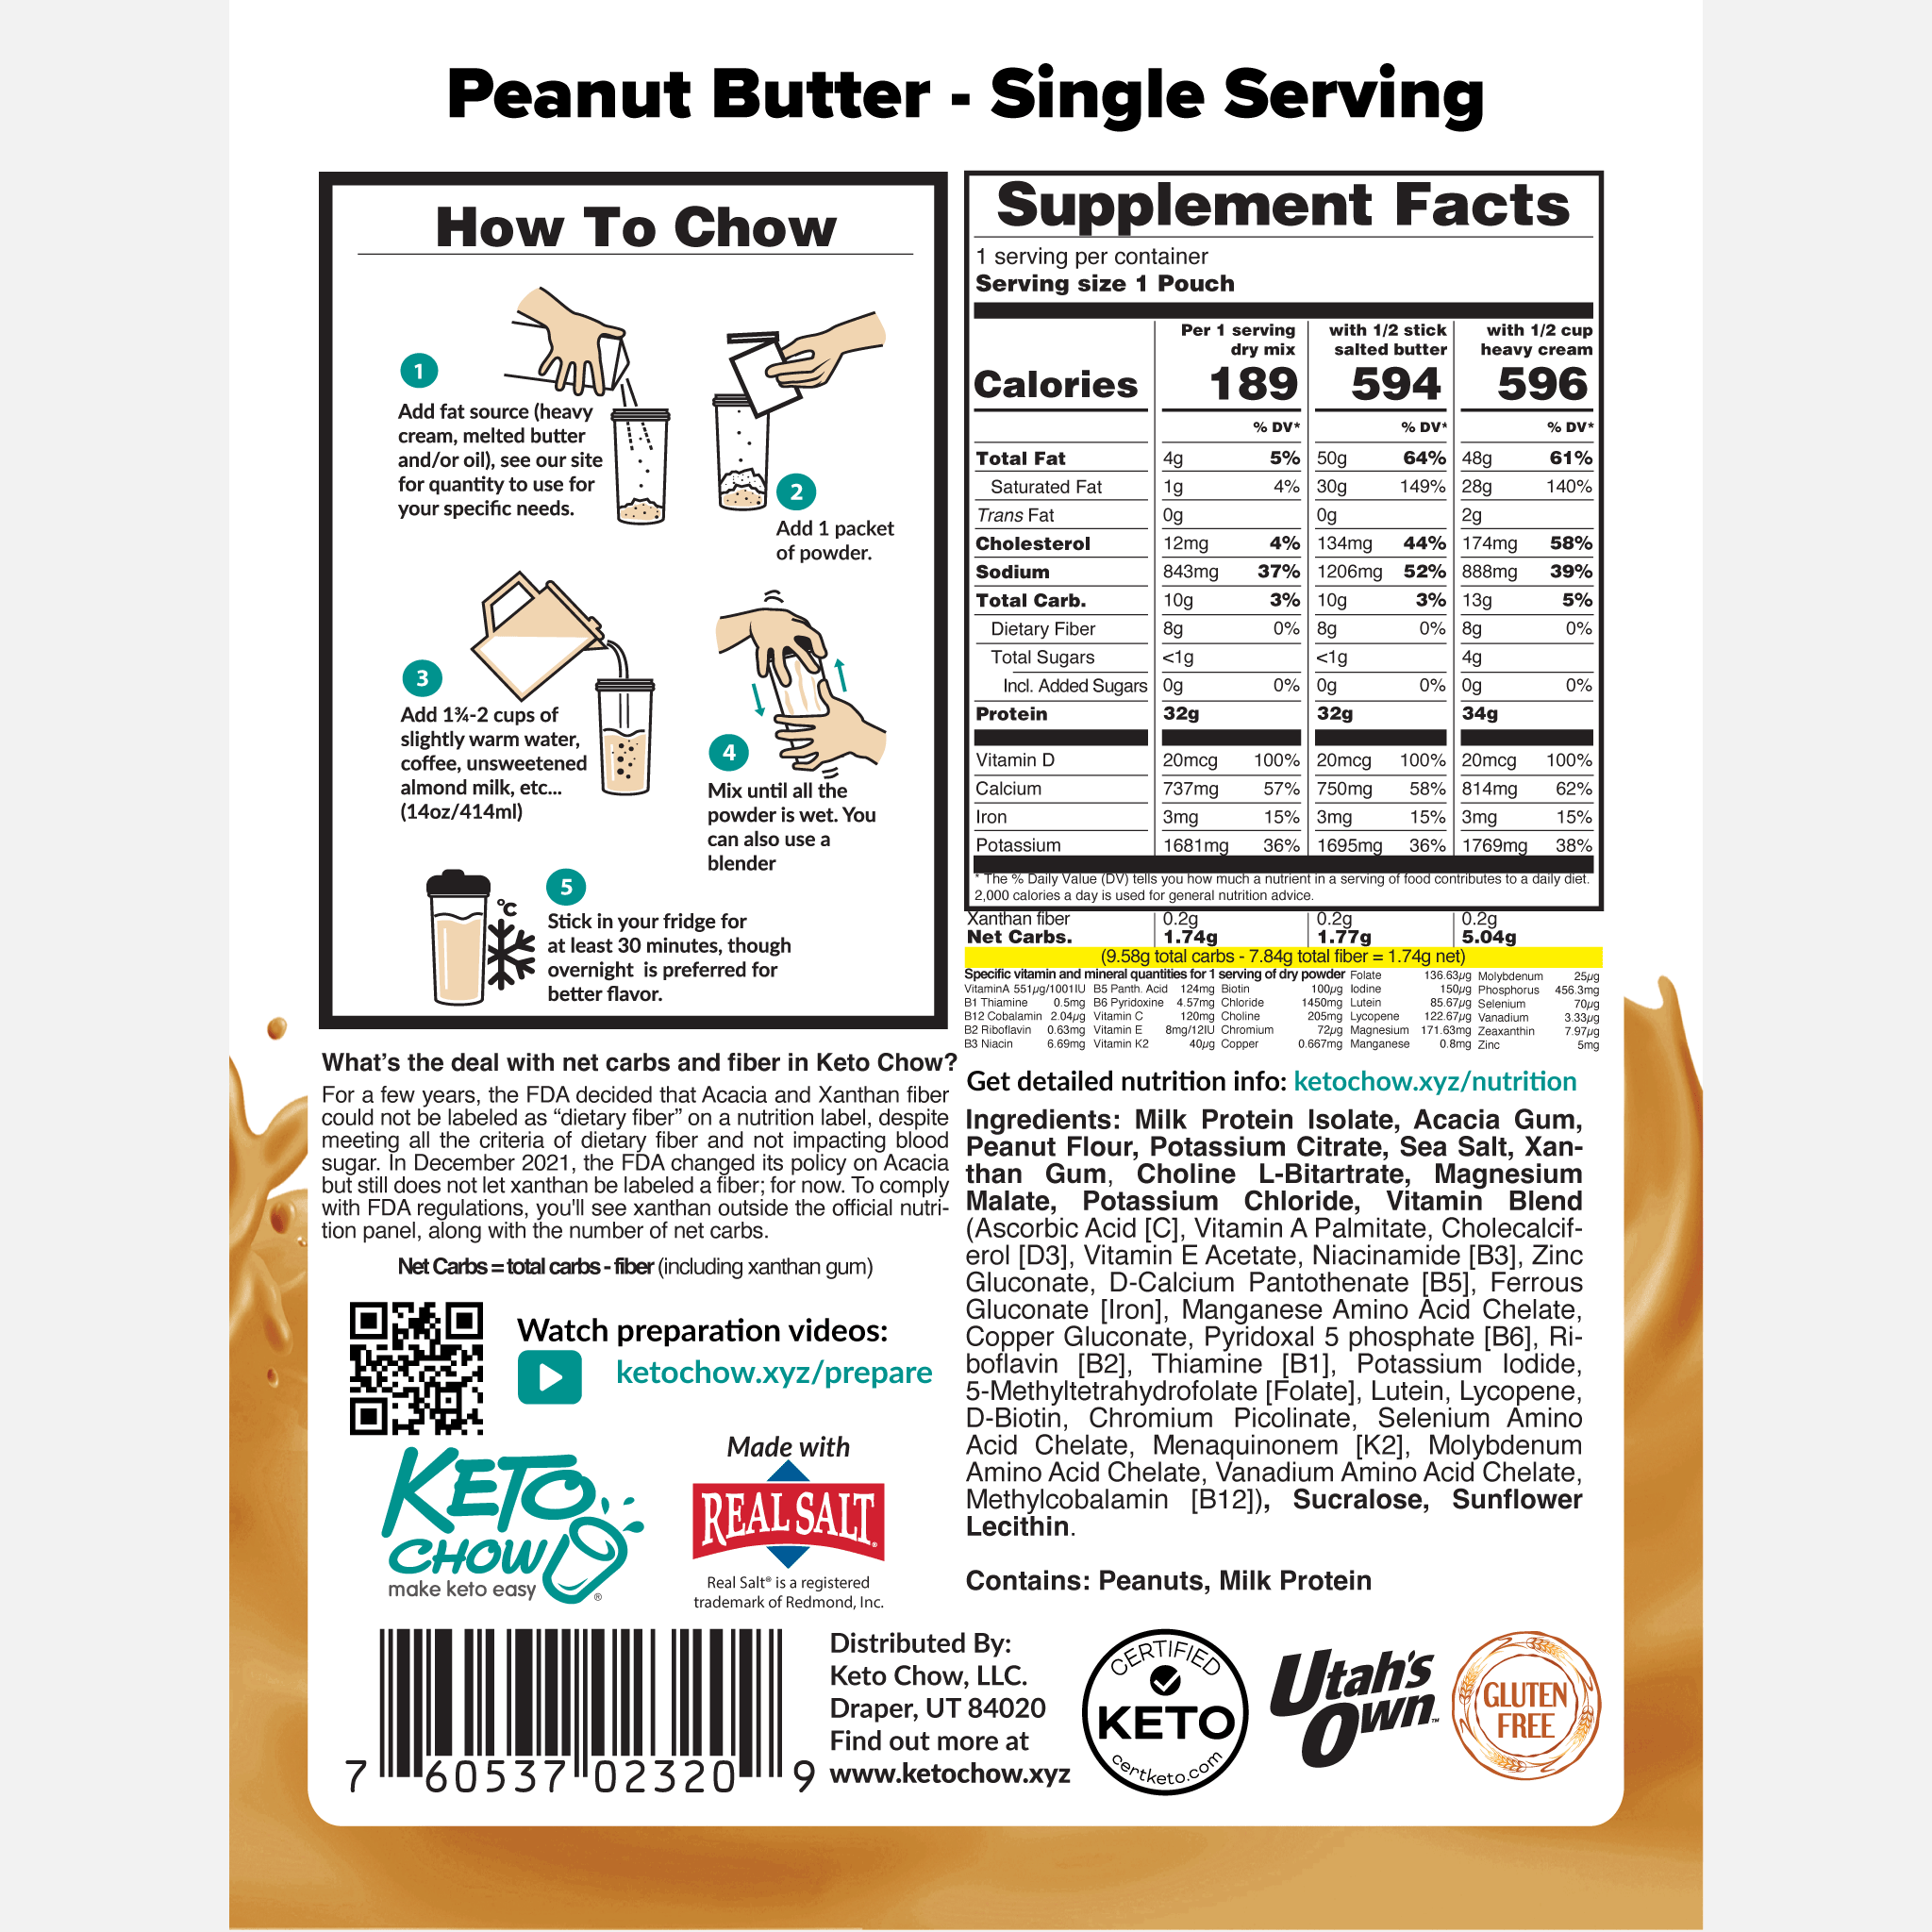 Peanut Butter Keto Chow package back